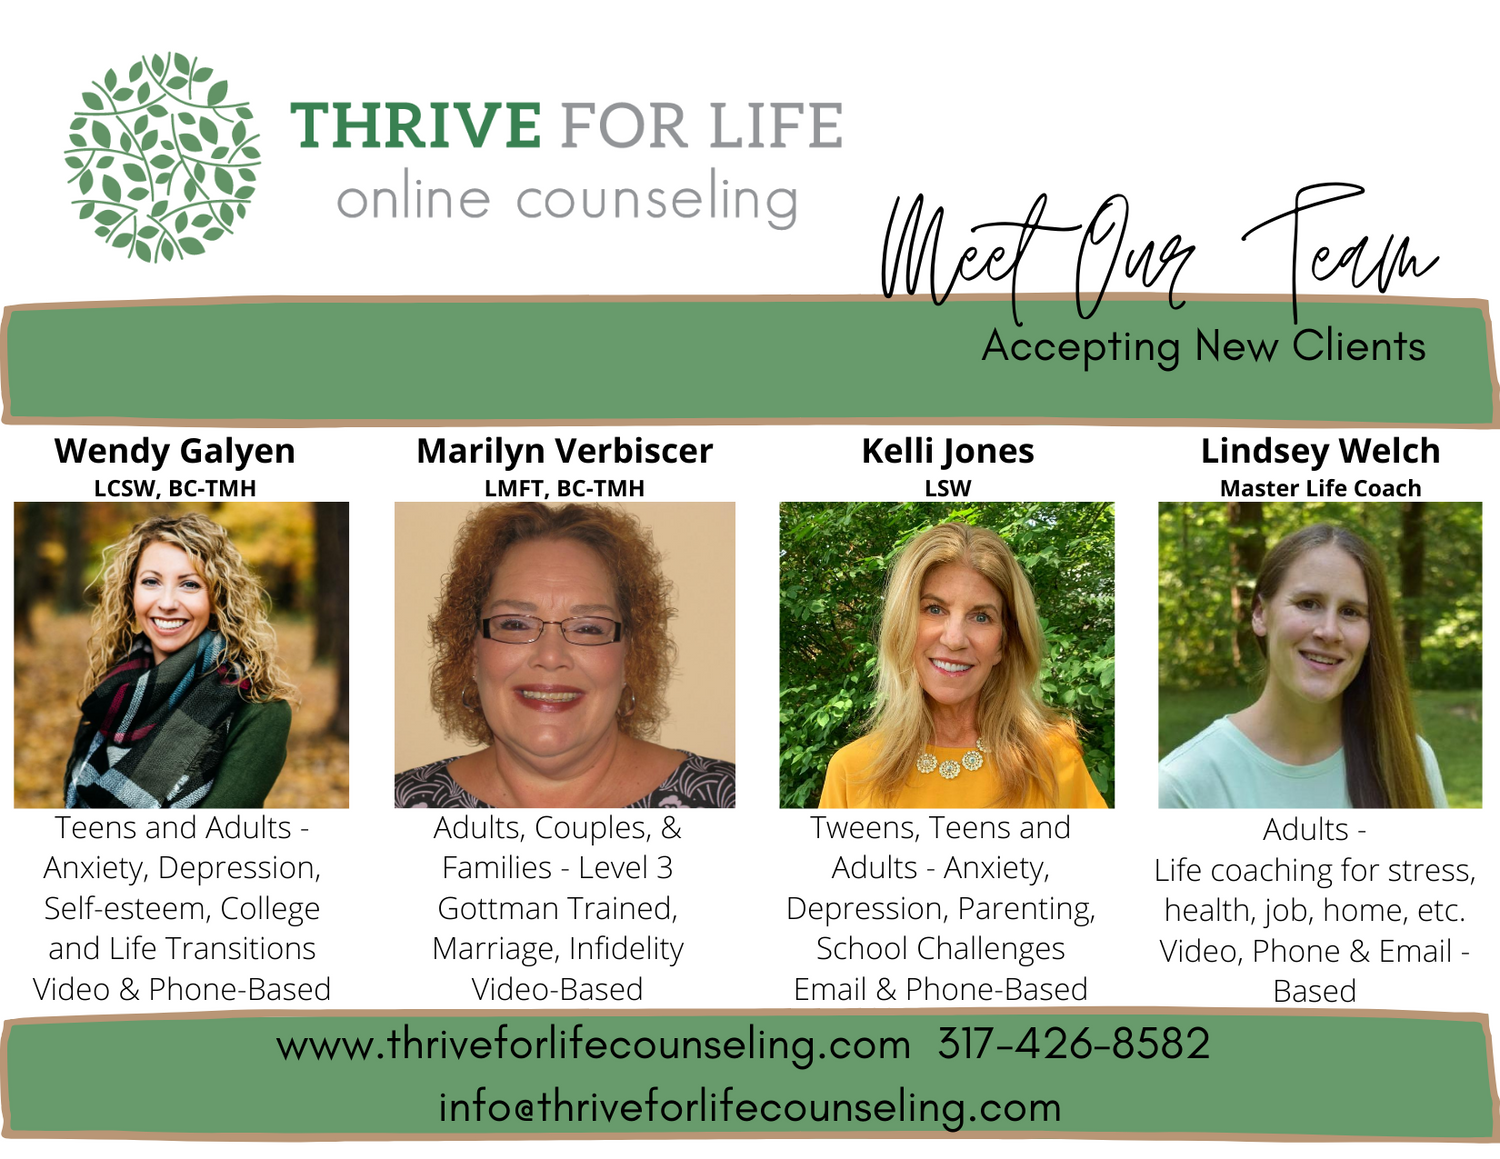 Gallery Photo of Thrive for Life Counseling offers a team of therapists who can support your needs for individual, couples, & family counseling plus life coaching.